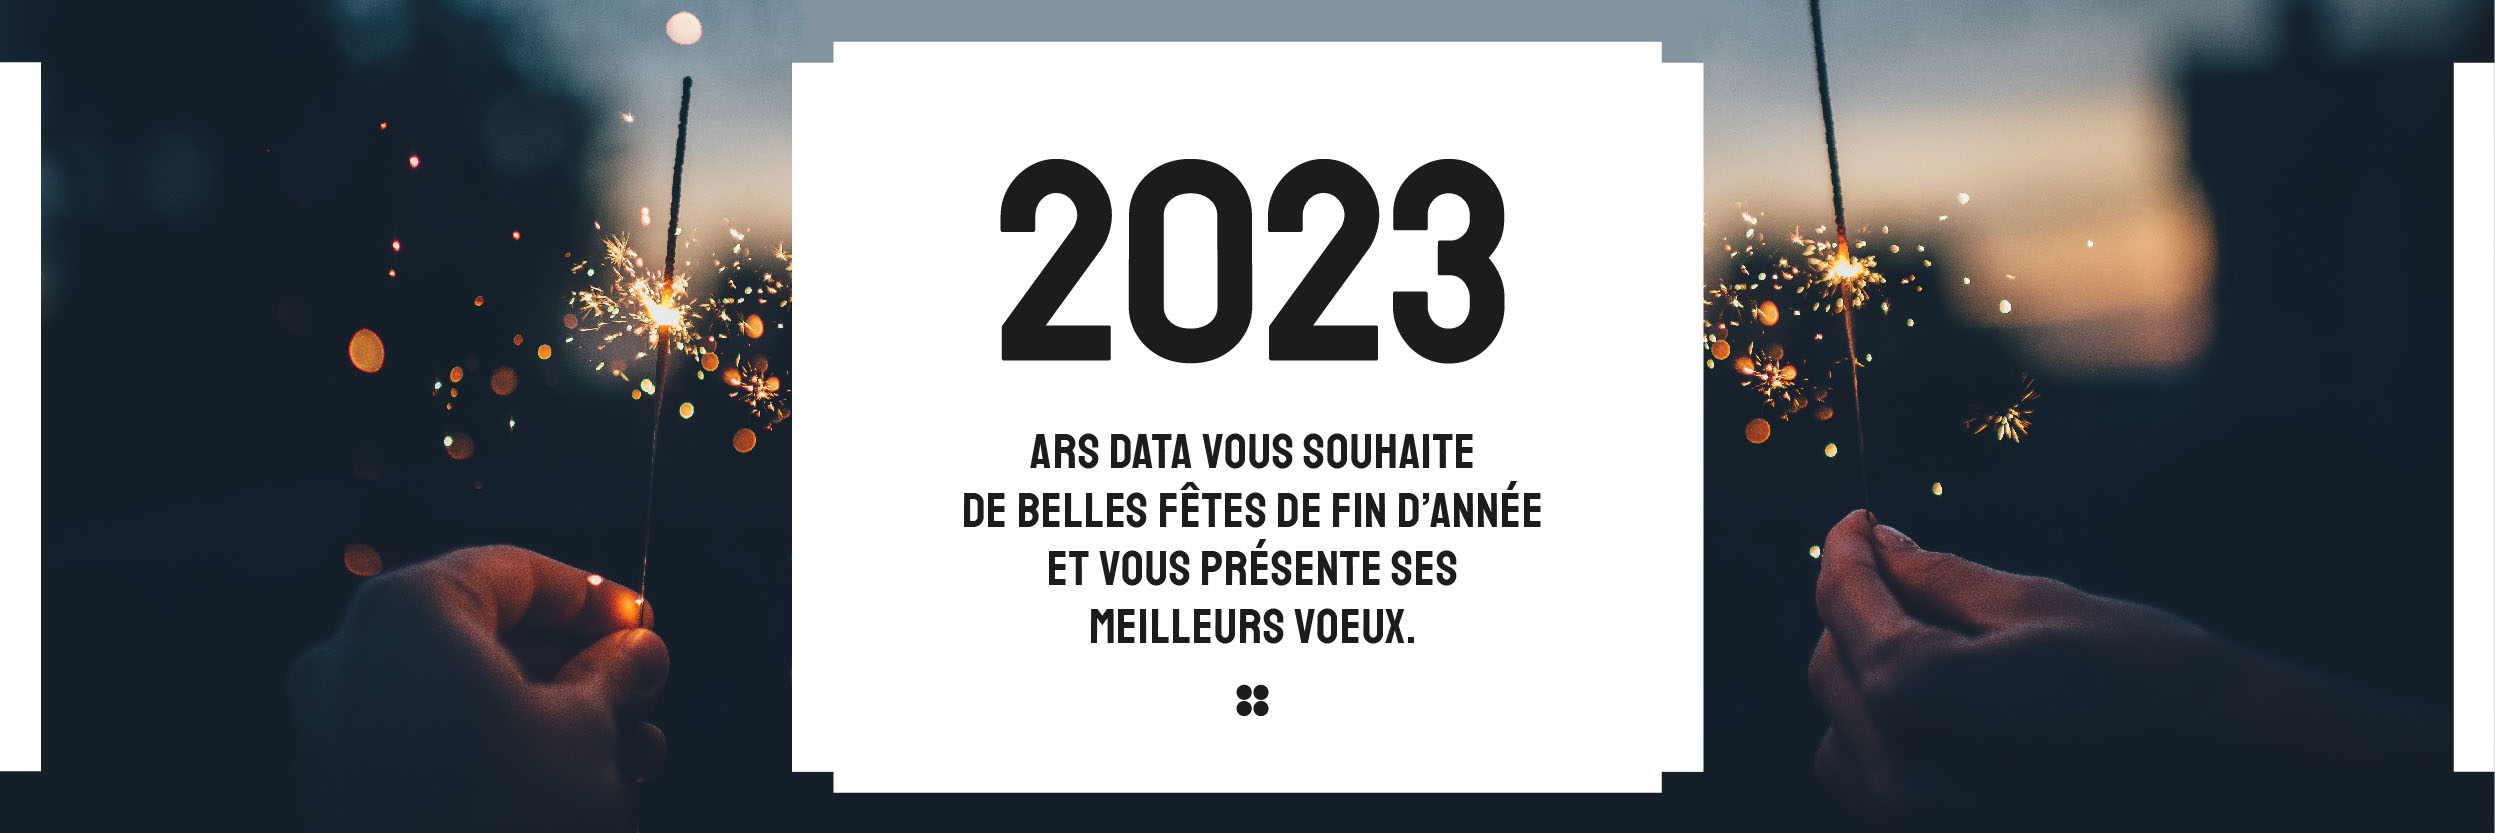 Voeux2023_article-04.jpg